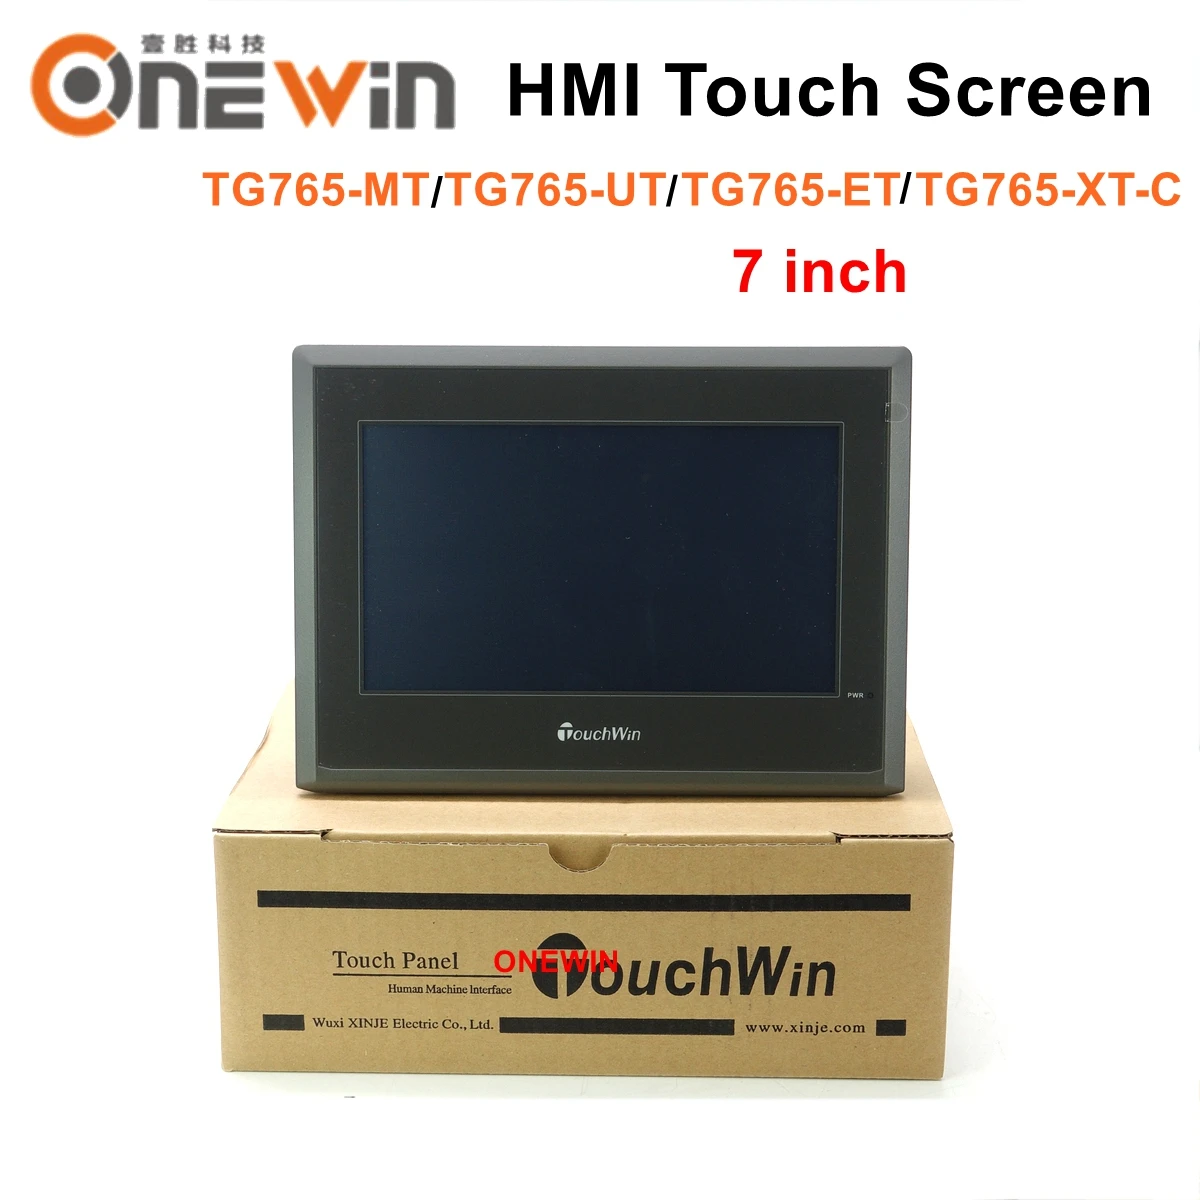 New XINJE touch panel 7" HMI Touch Screen TG765-MT with USB Cable 